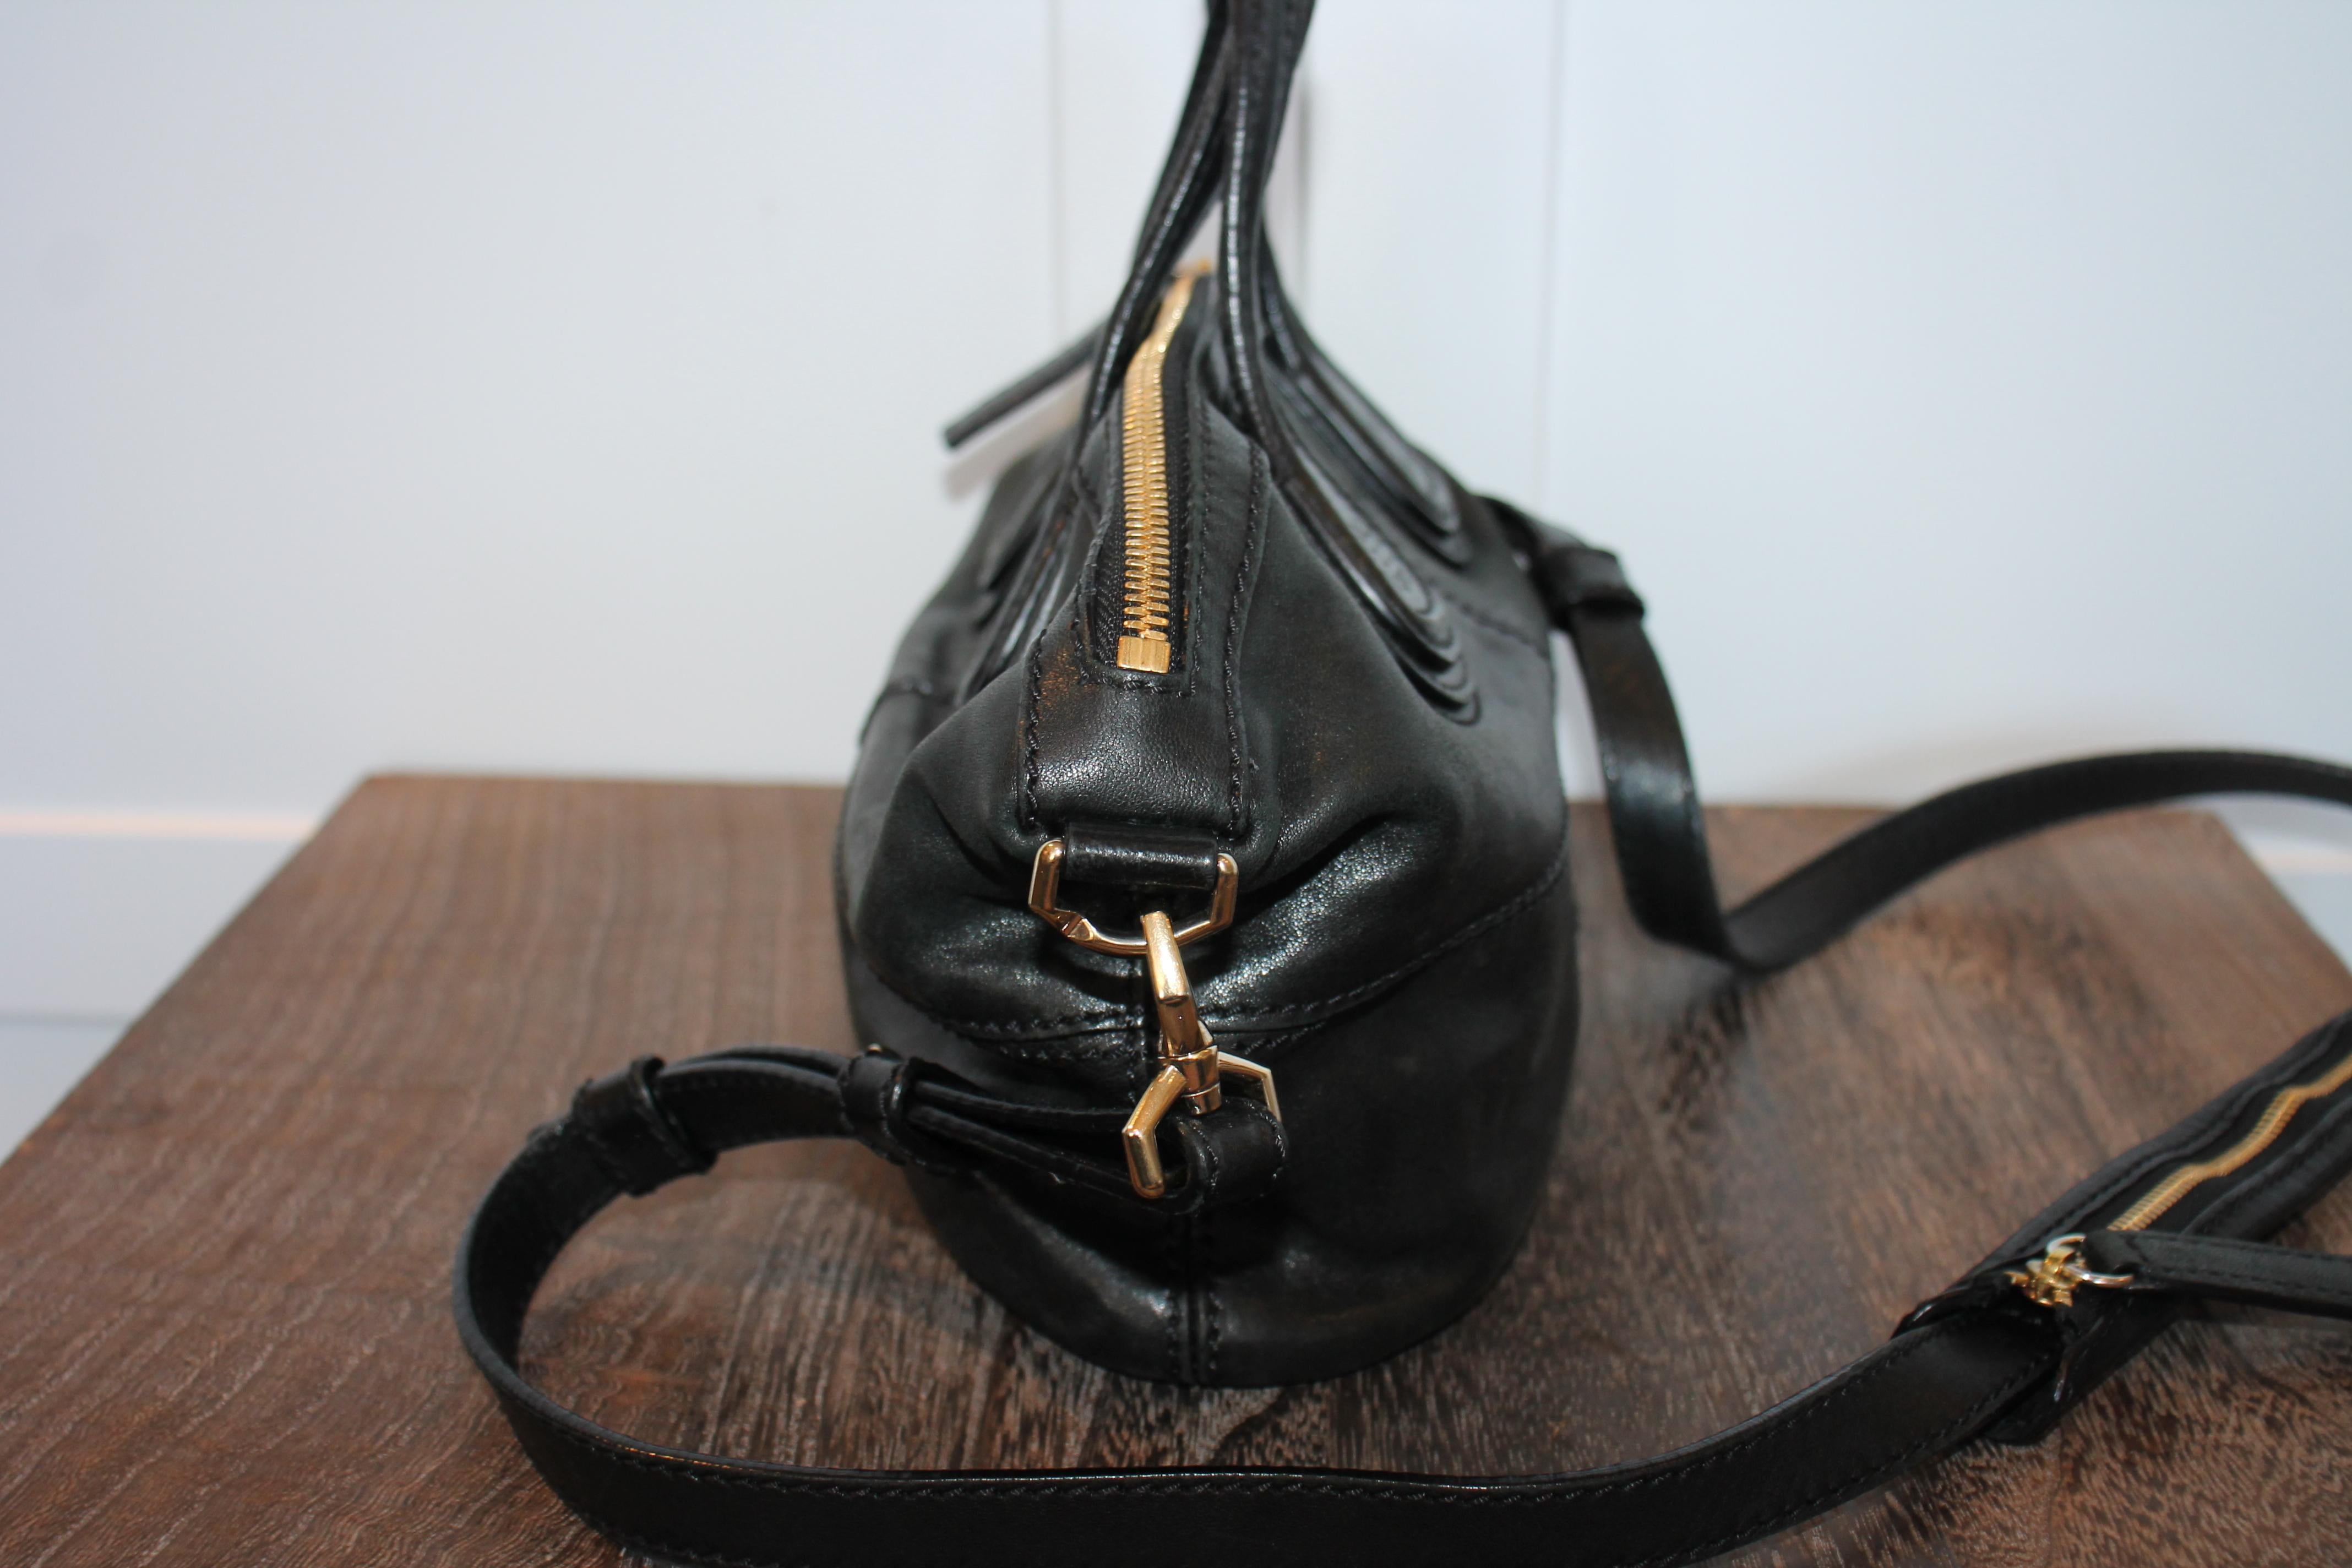 Givenchy Micro Nightingale Satchel In Good Condition For Sale In Roslyn, NY